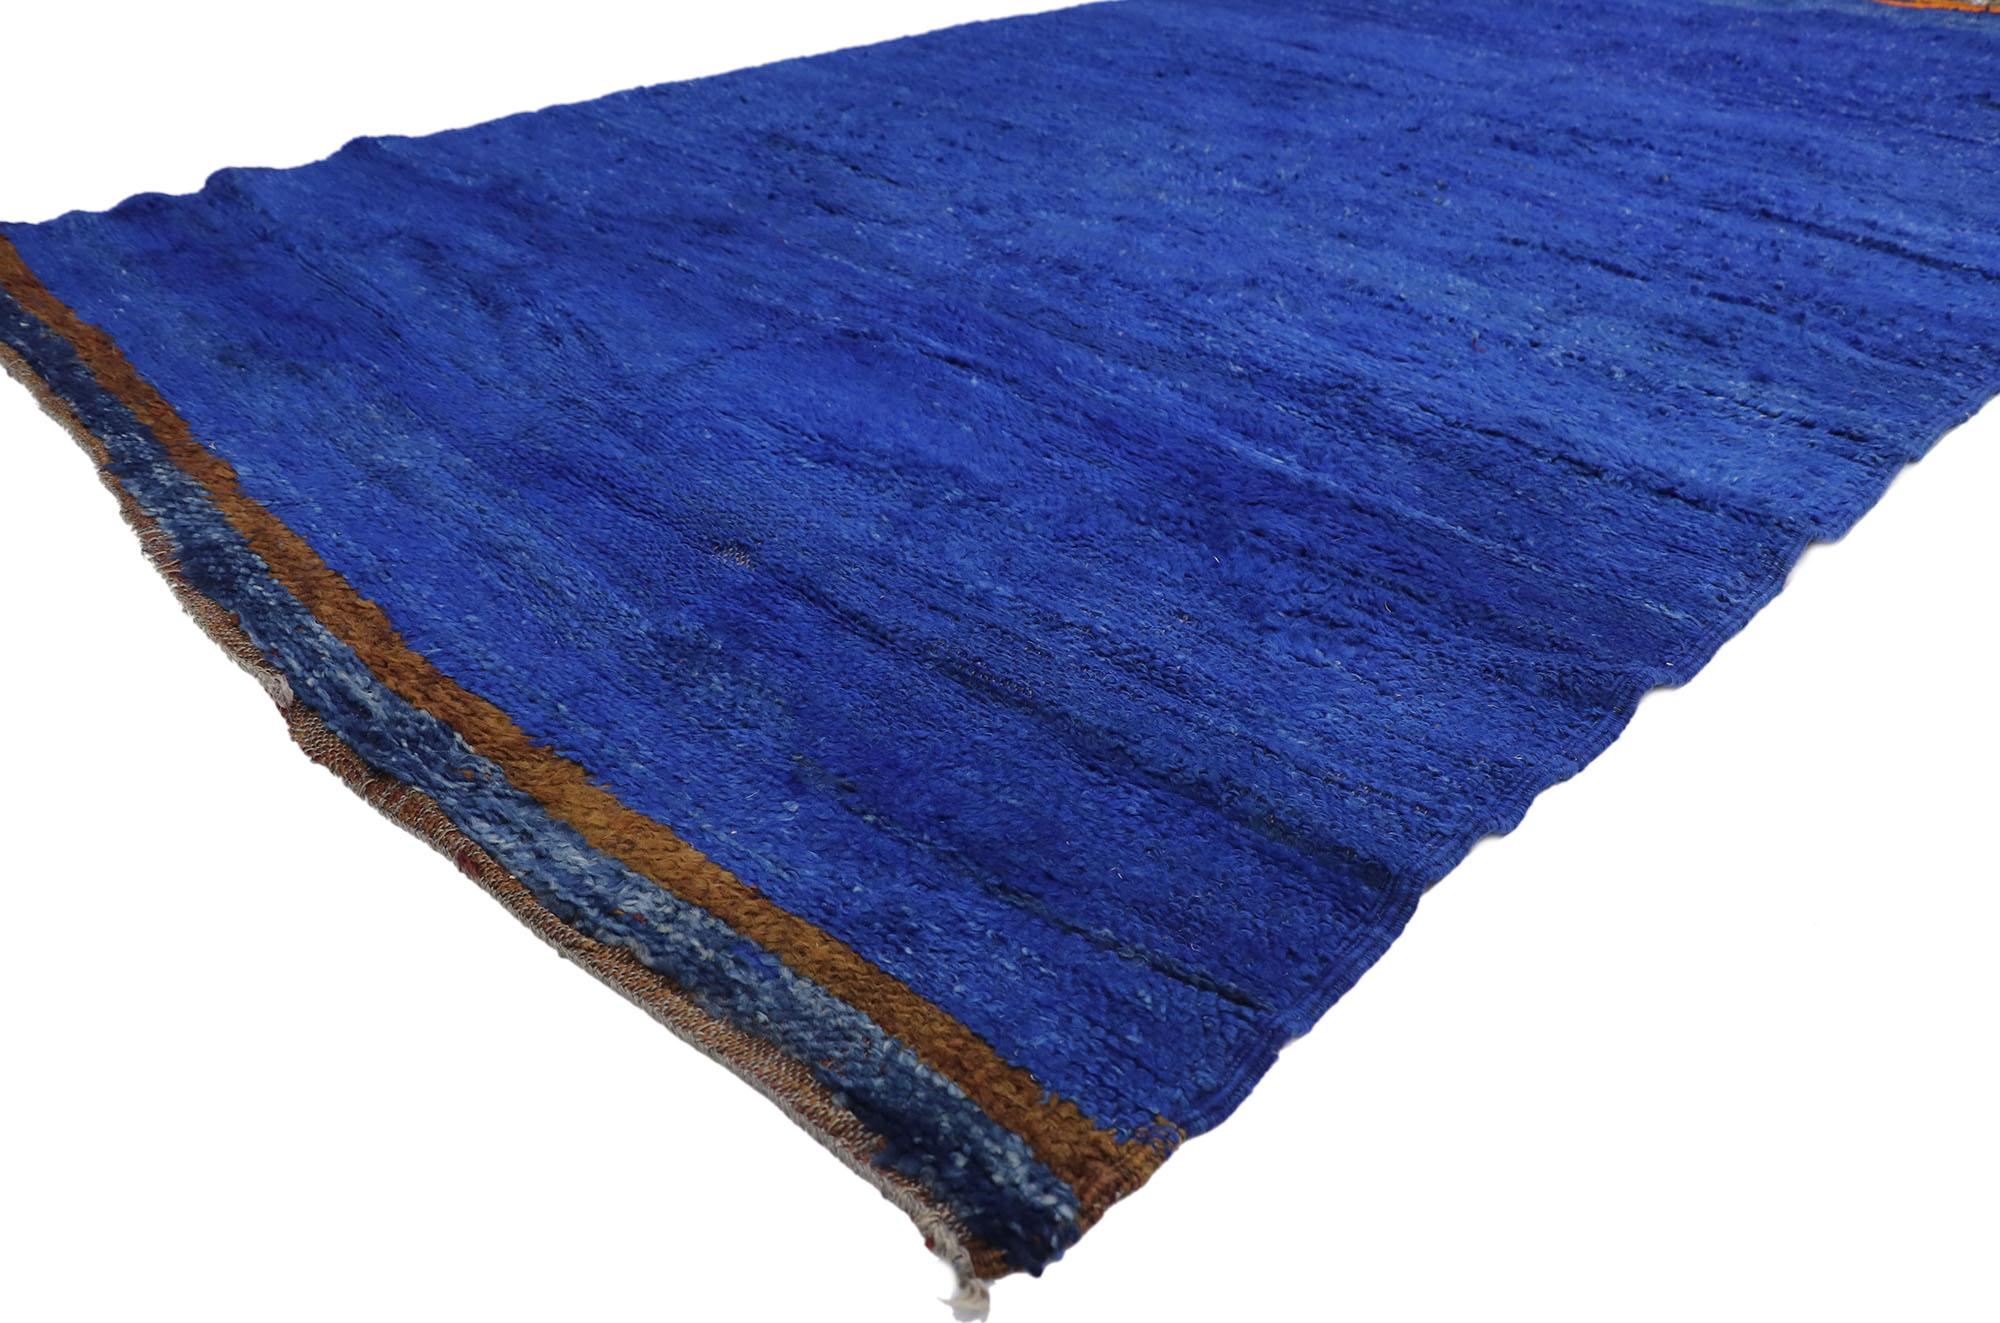 21286 Vintage Berber Blue Moroccan rug 05'10 x 11'02. With its simplicity, plush pile and Bohemian vibes, this hand knotted wool vintage Berber Moroccan rug is a captivating vision of woven beauty. Imbued with blue hues, the rich waves of abrash of